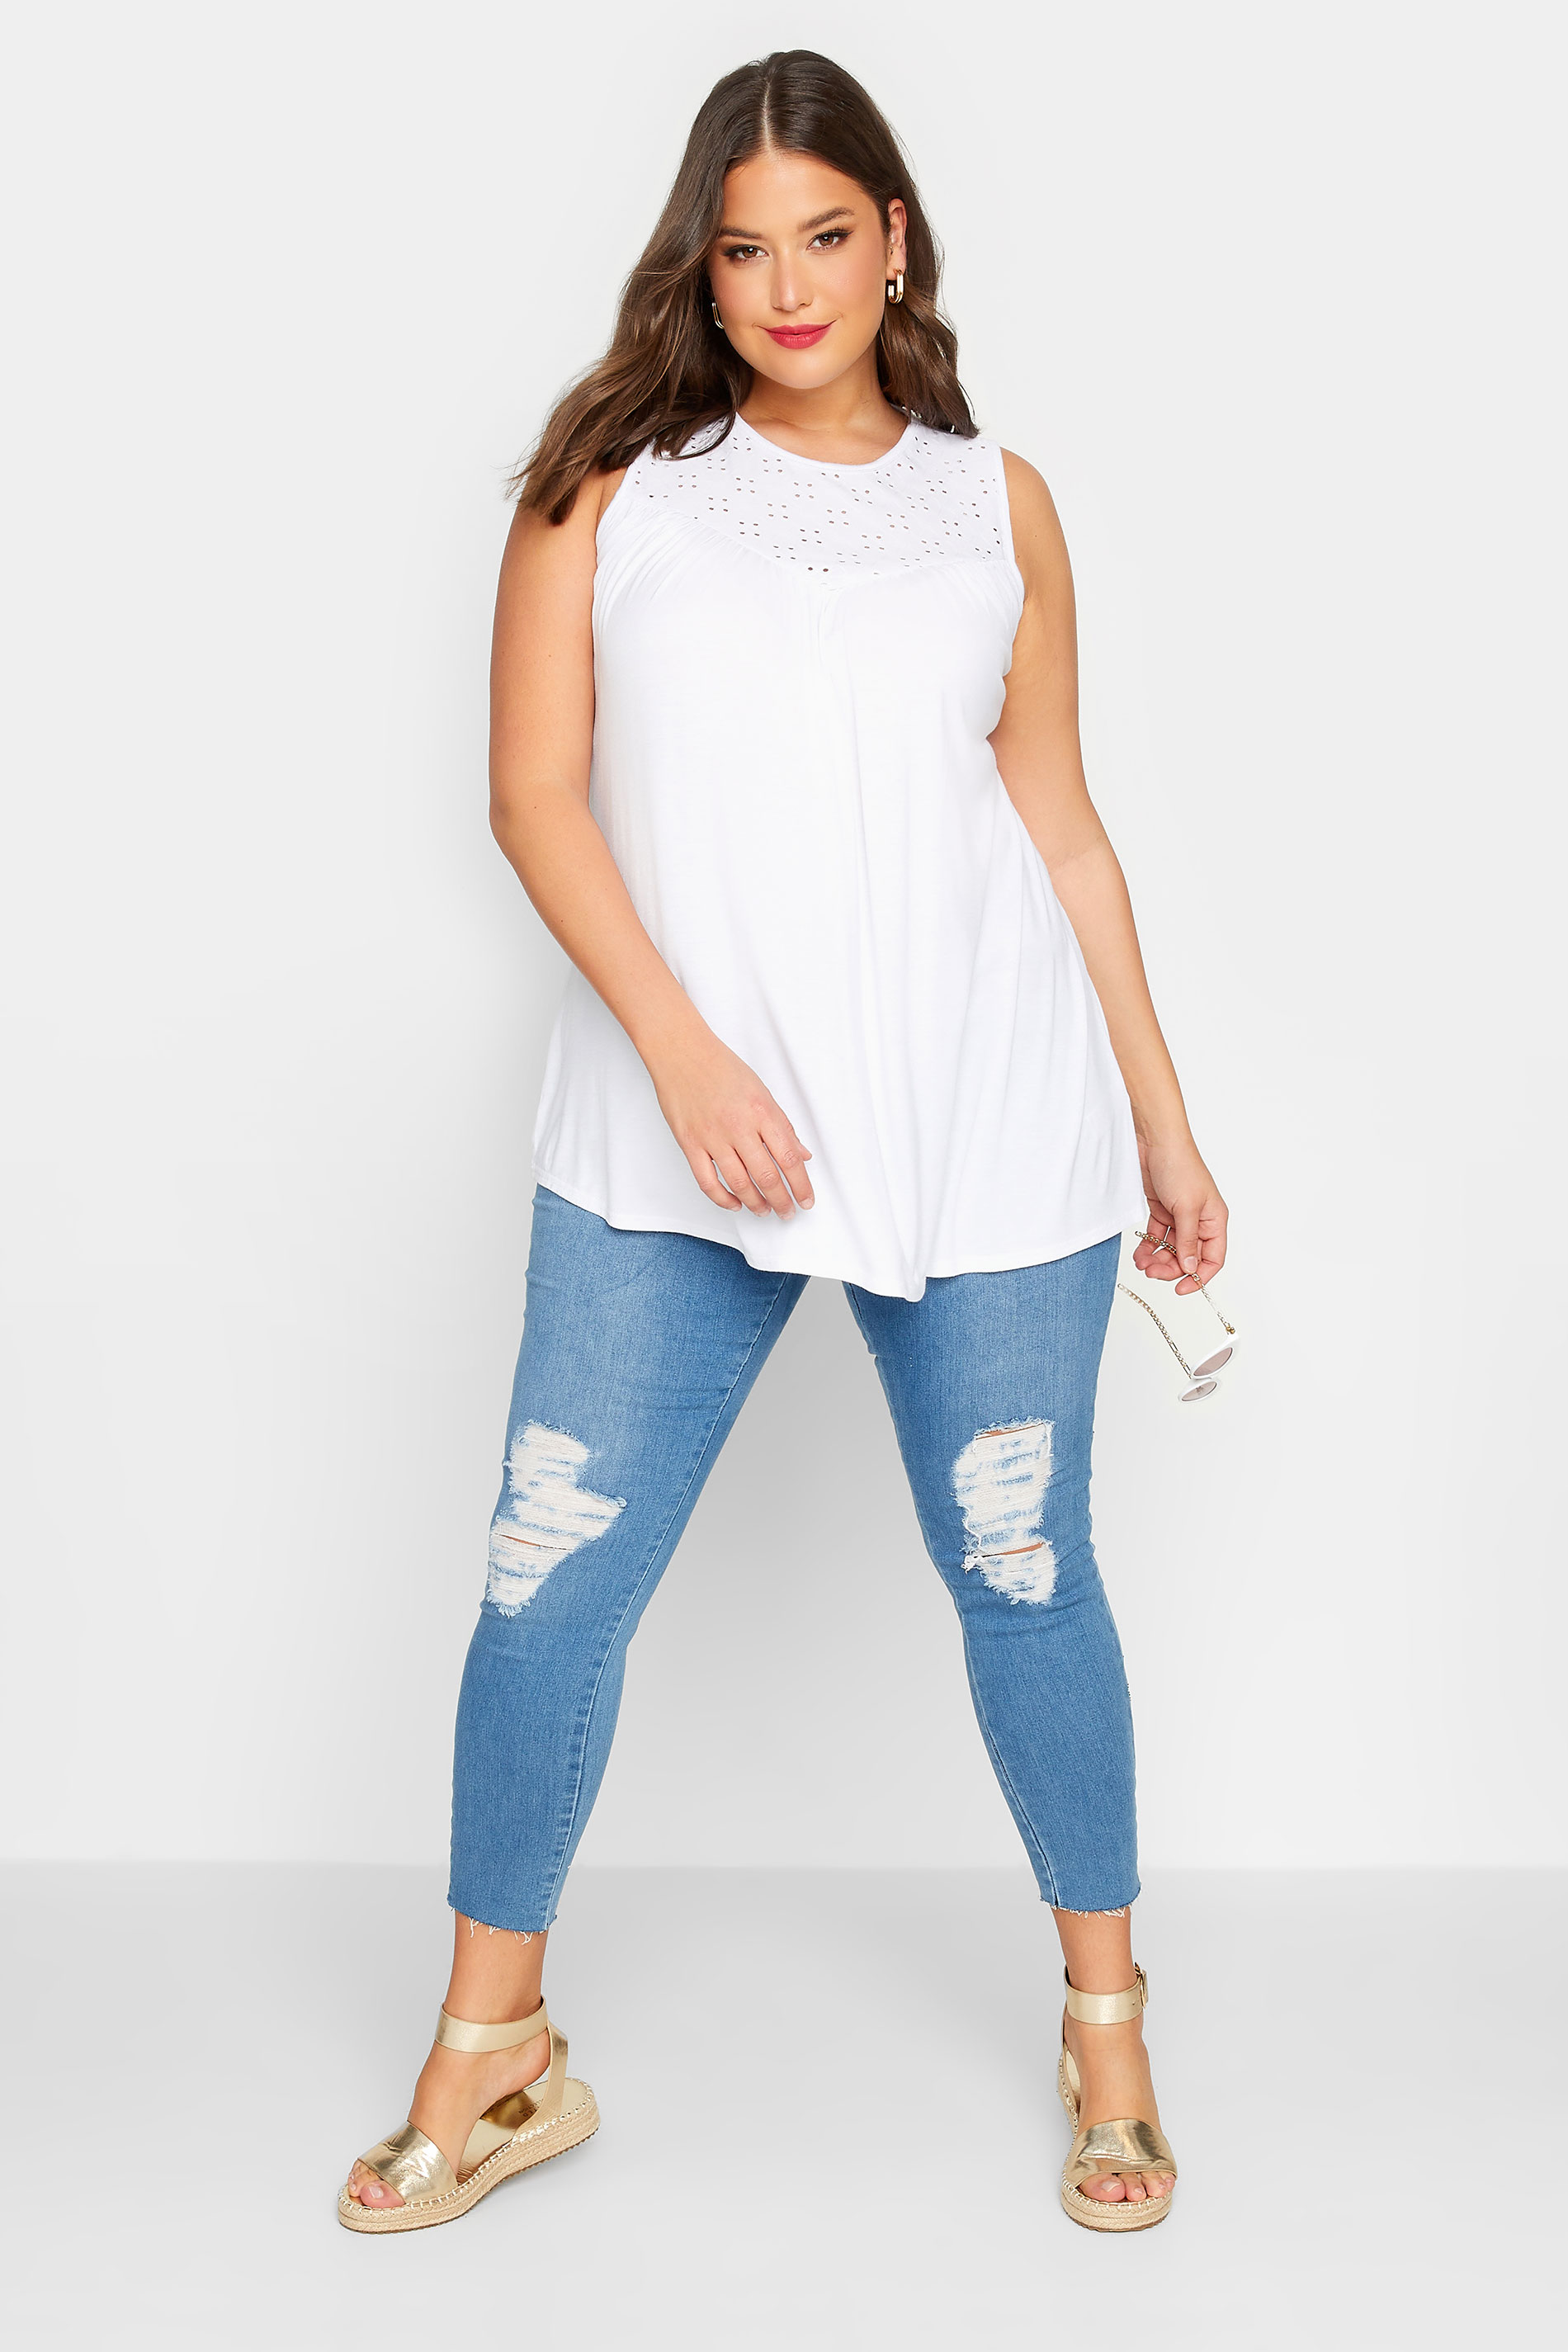 LIMITED COLLECTION Plus Size White Broderie Anglaise Insert Vest Top | Yours Clothing 2